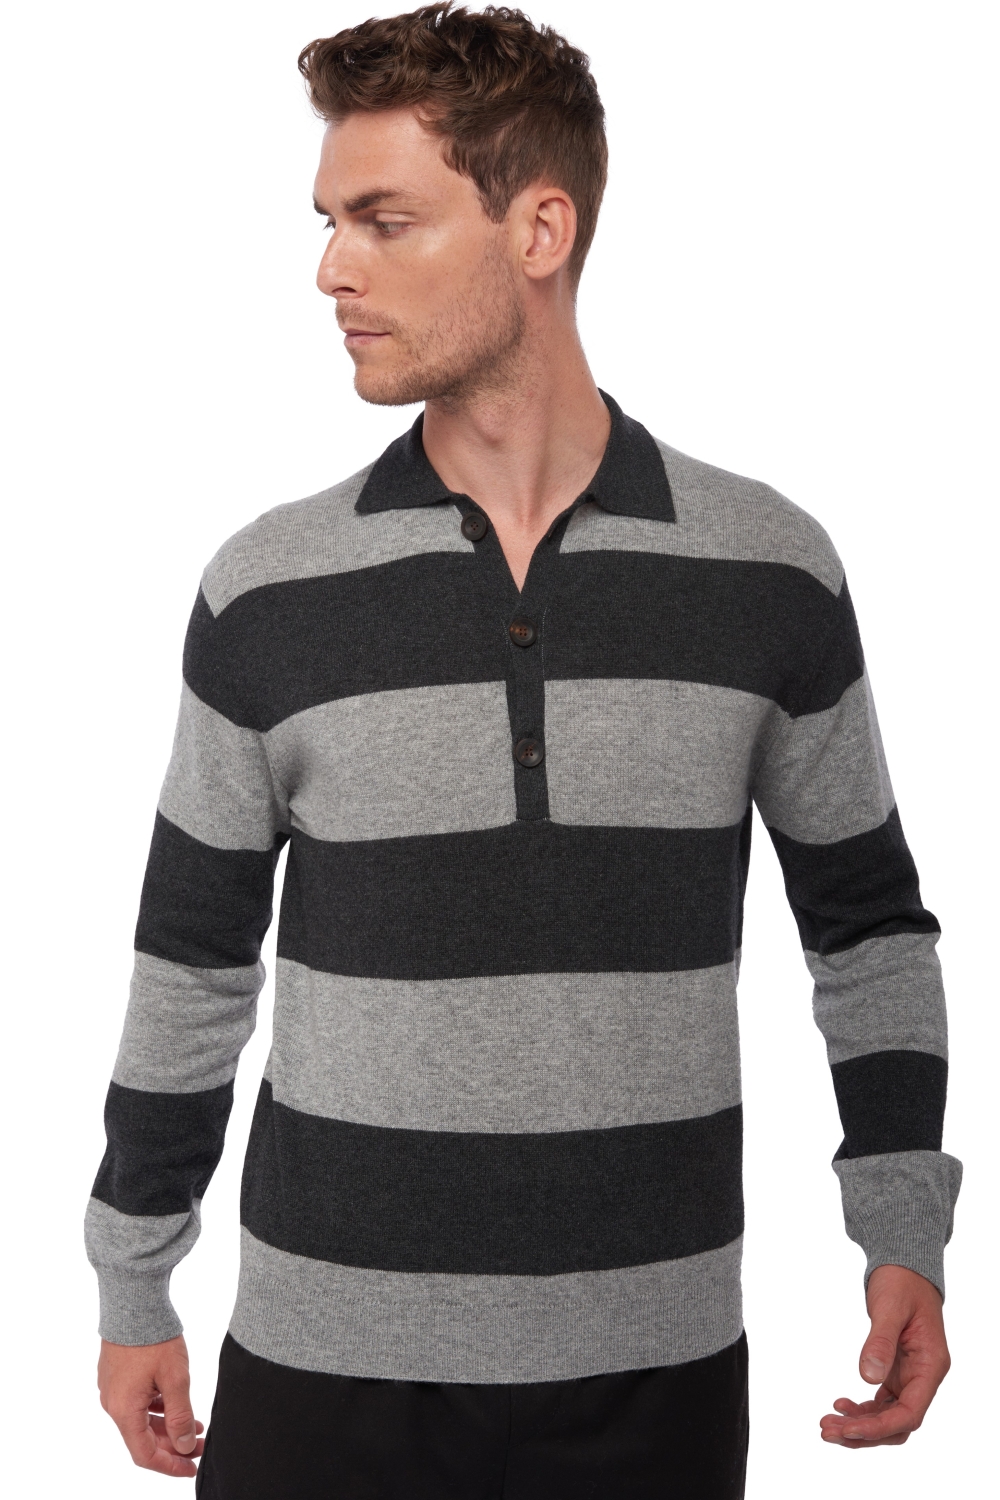 Cashmere men polo style sweaters vinh grey marl charcoal marl xl